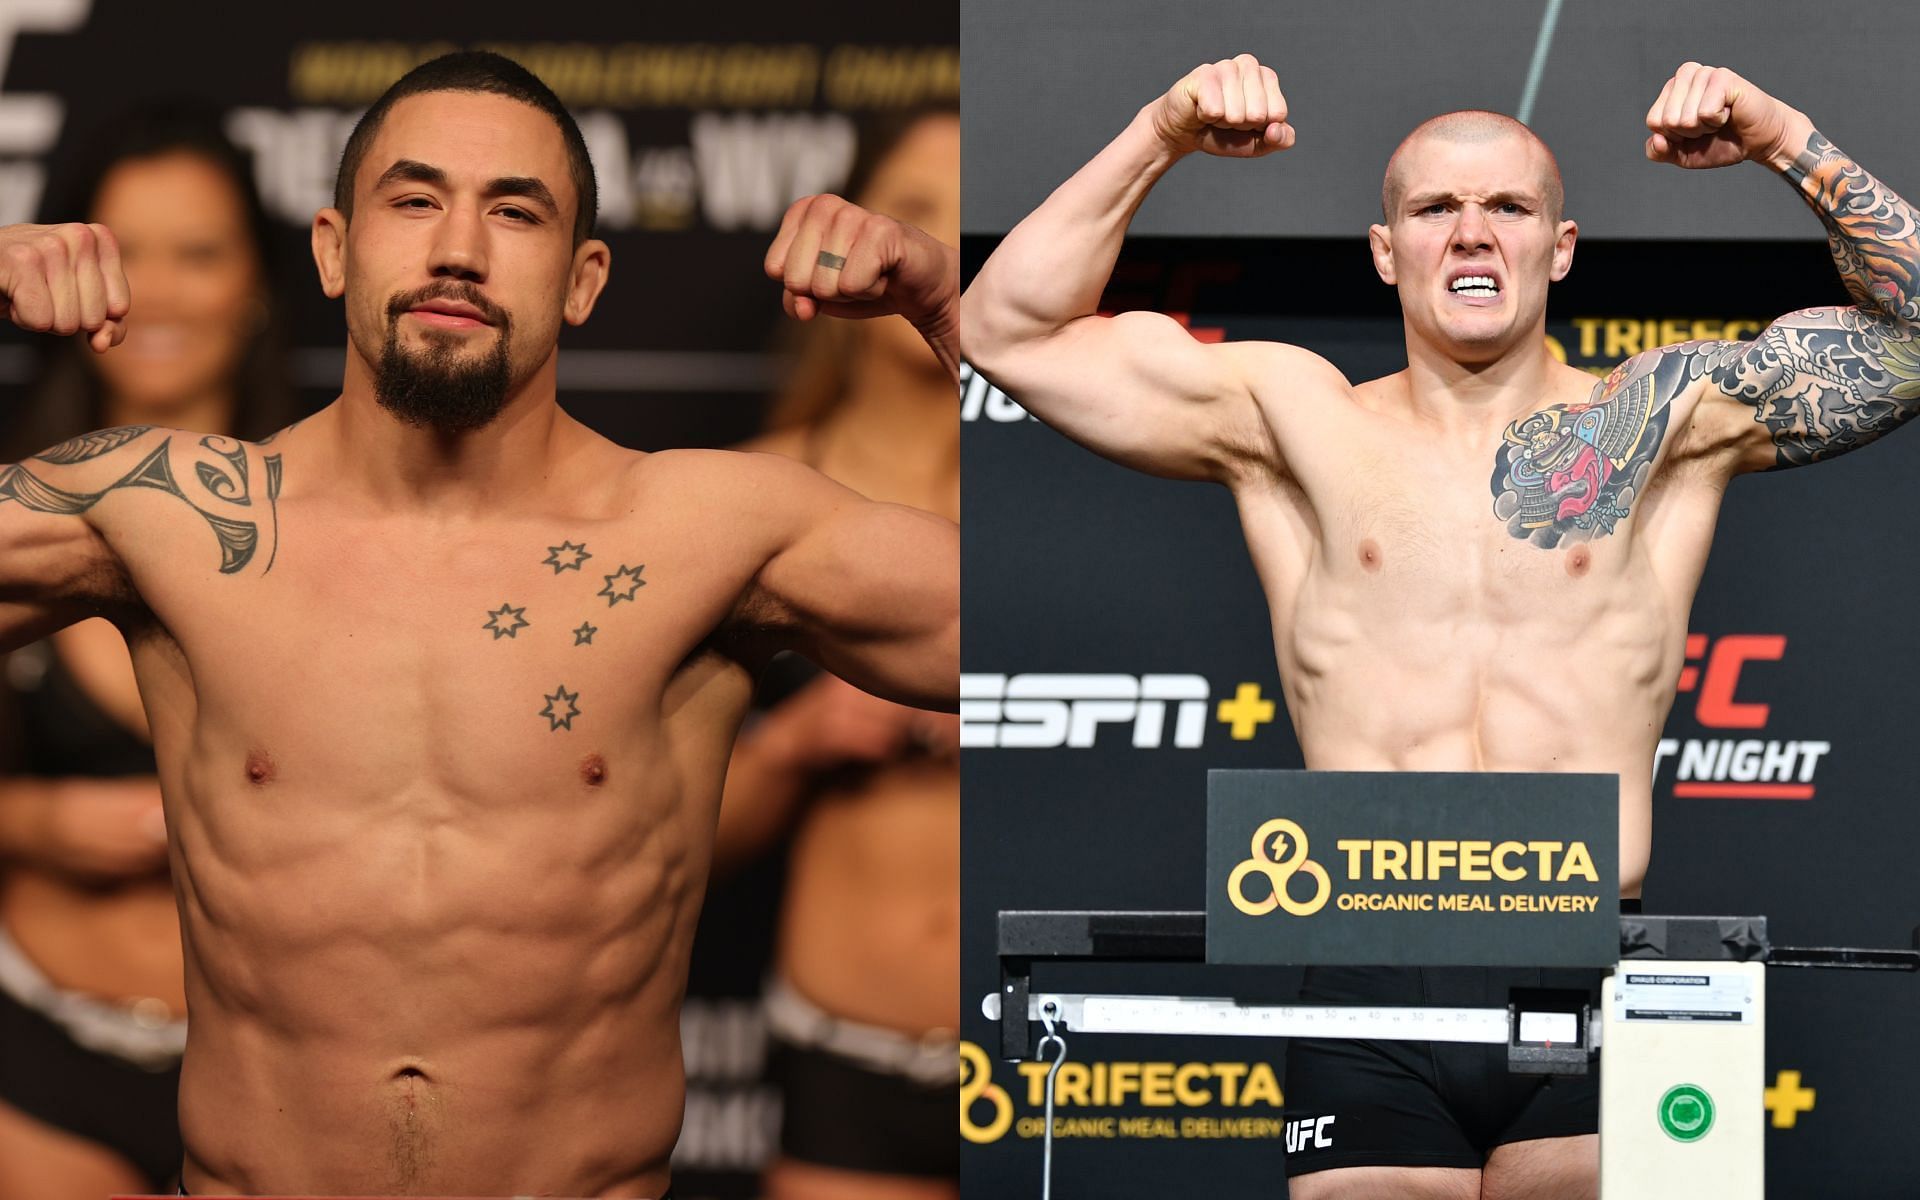 Robert Whittaker and Marvin Vettori [Image credits: Getty Images]